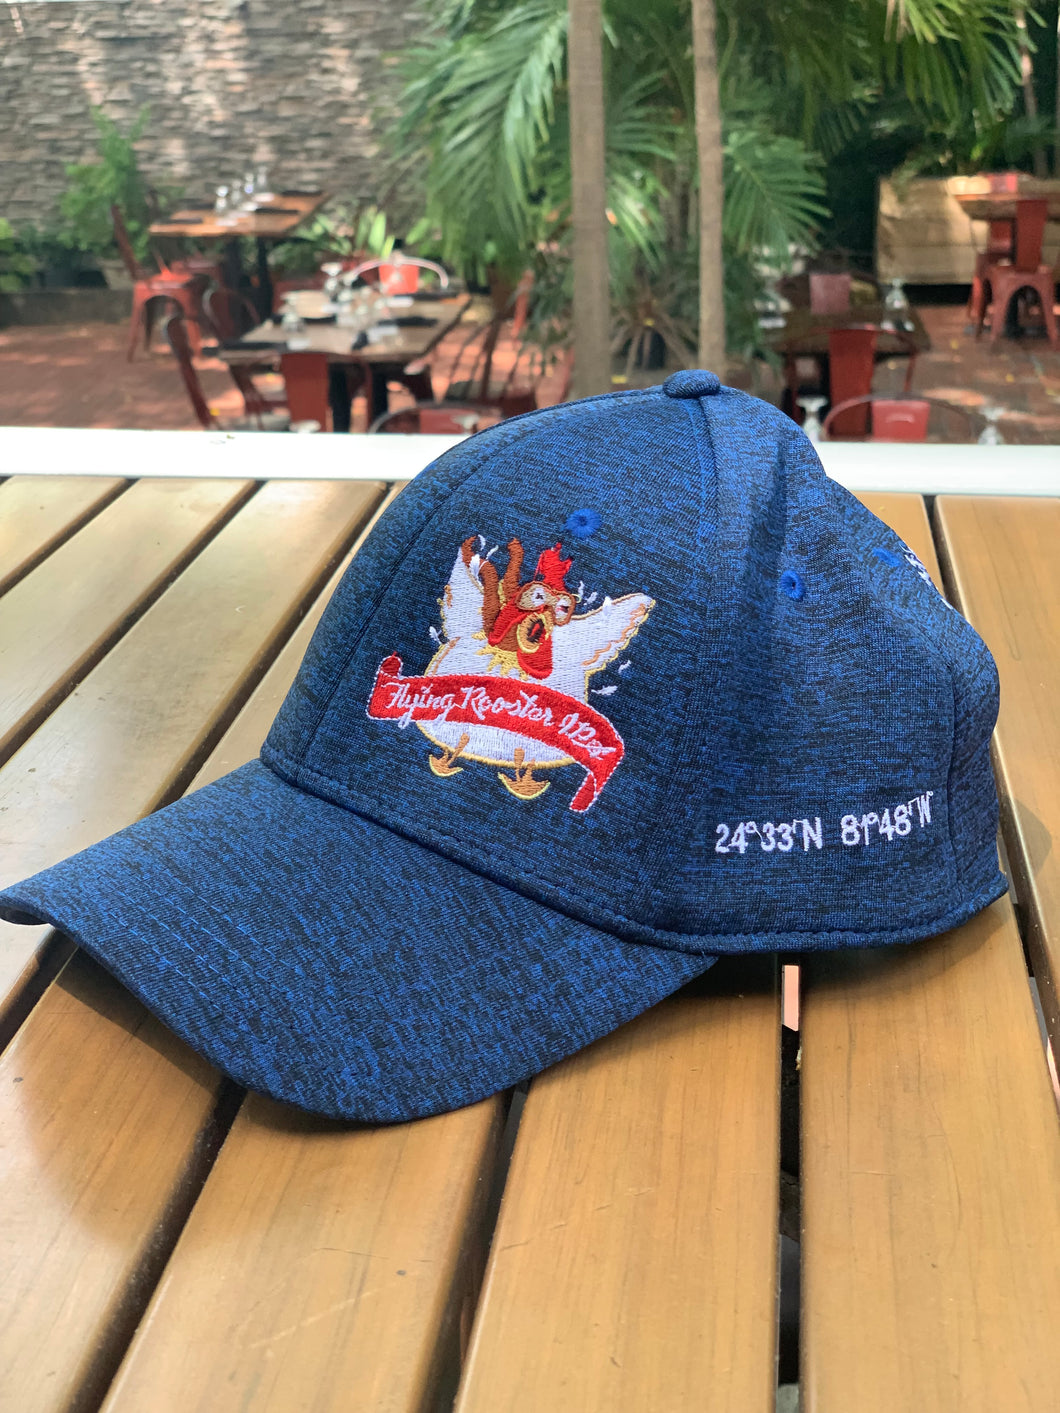 Flying Rooster IPA Snapback Hat